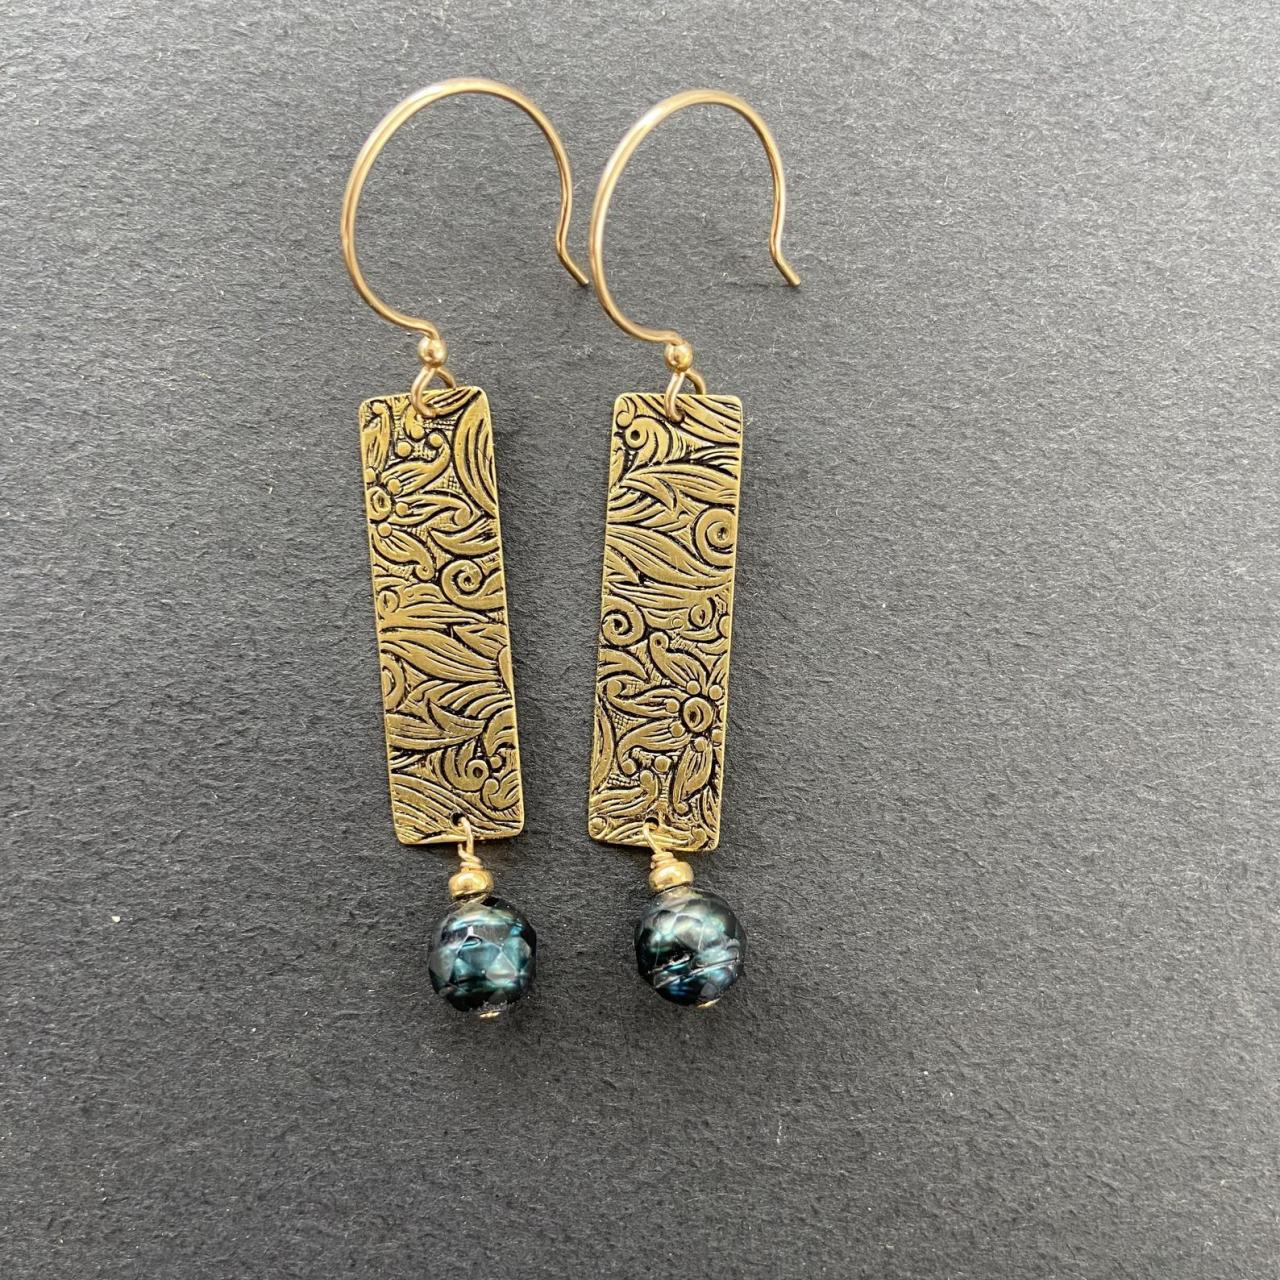 Long Rectangle Drop Dangle Brass Patterned Earrings Earthy Natural Boho Tooled Leather Western 14kt Gold Filled Teal Faceted Pearl